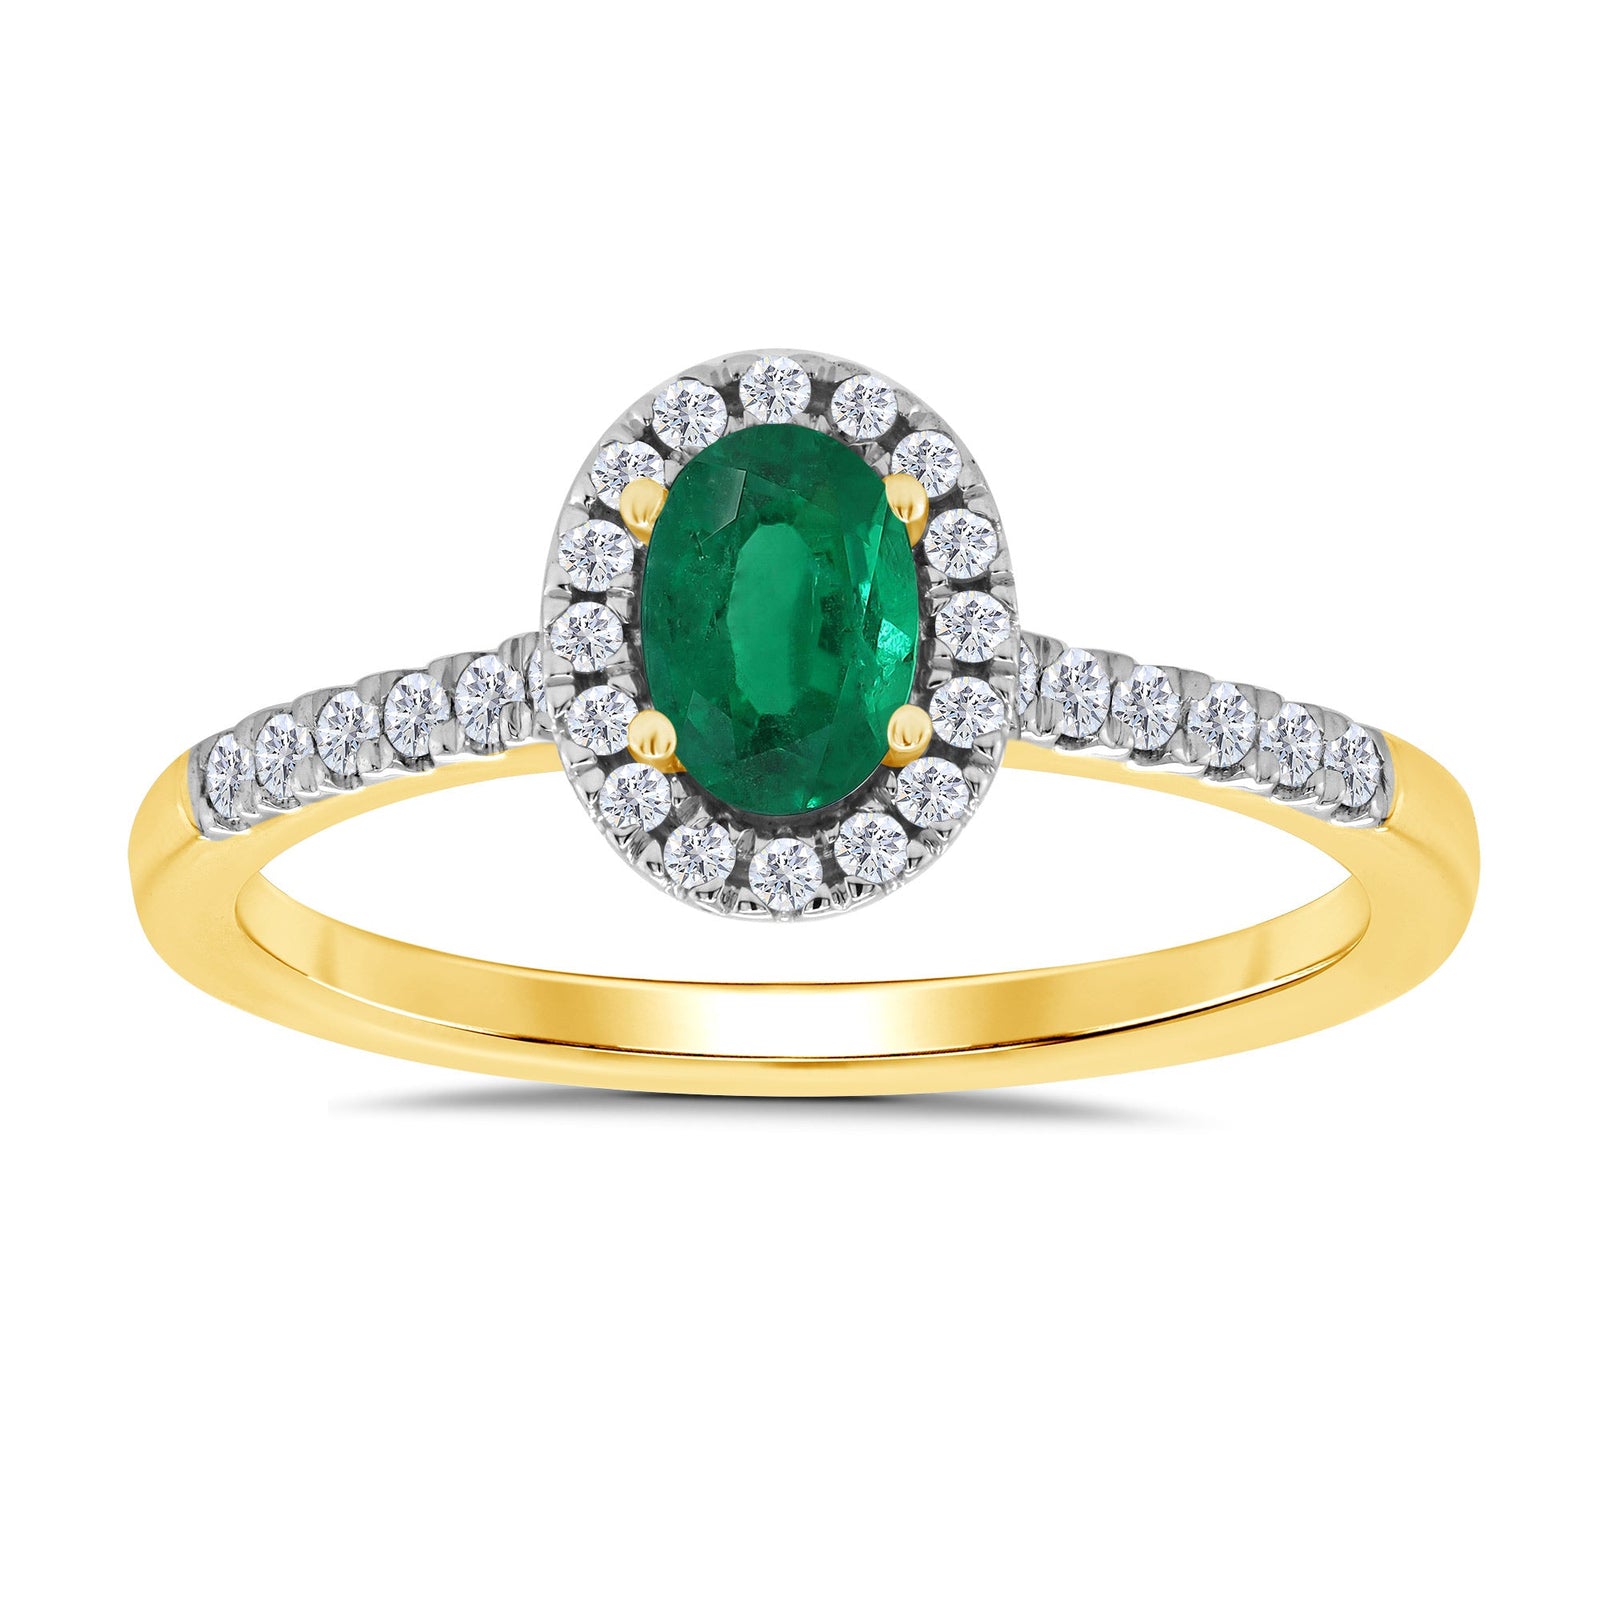 9ct gold 6x4mm oval emerald & diamond cluster ring with diamond set shoulders 0.20ct